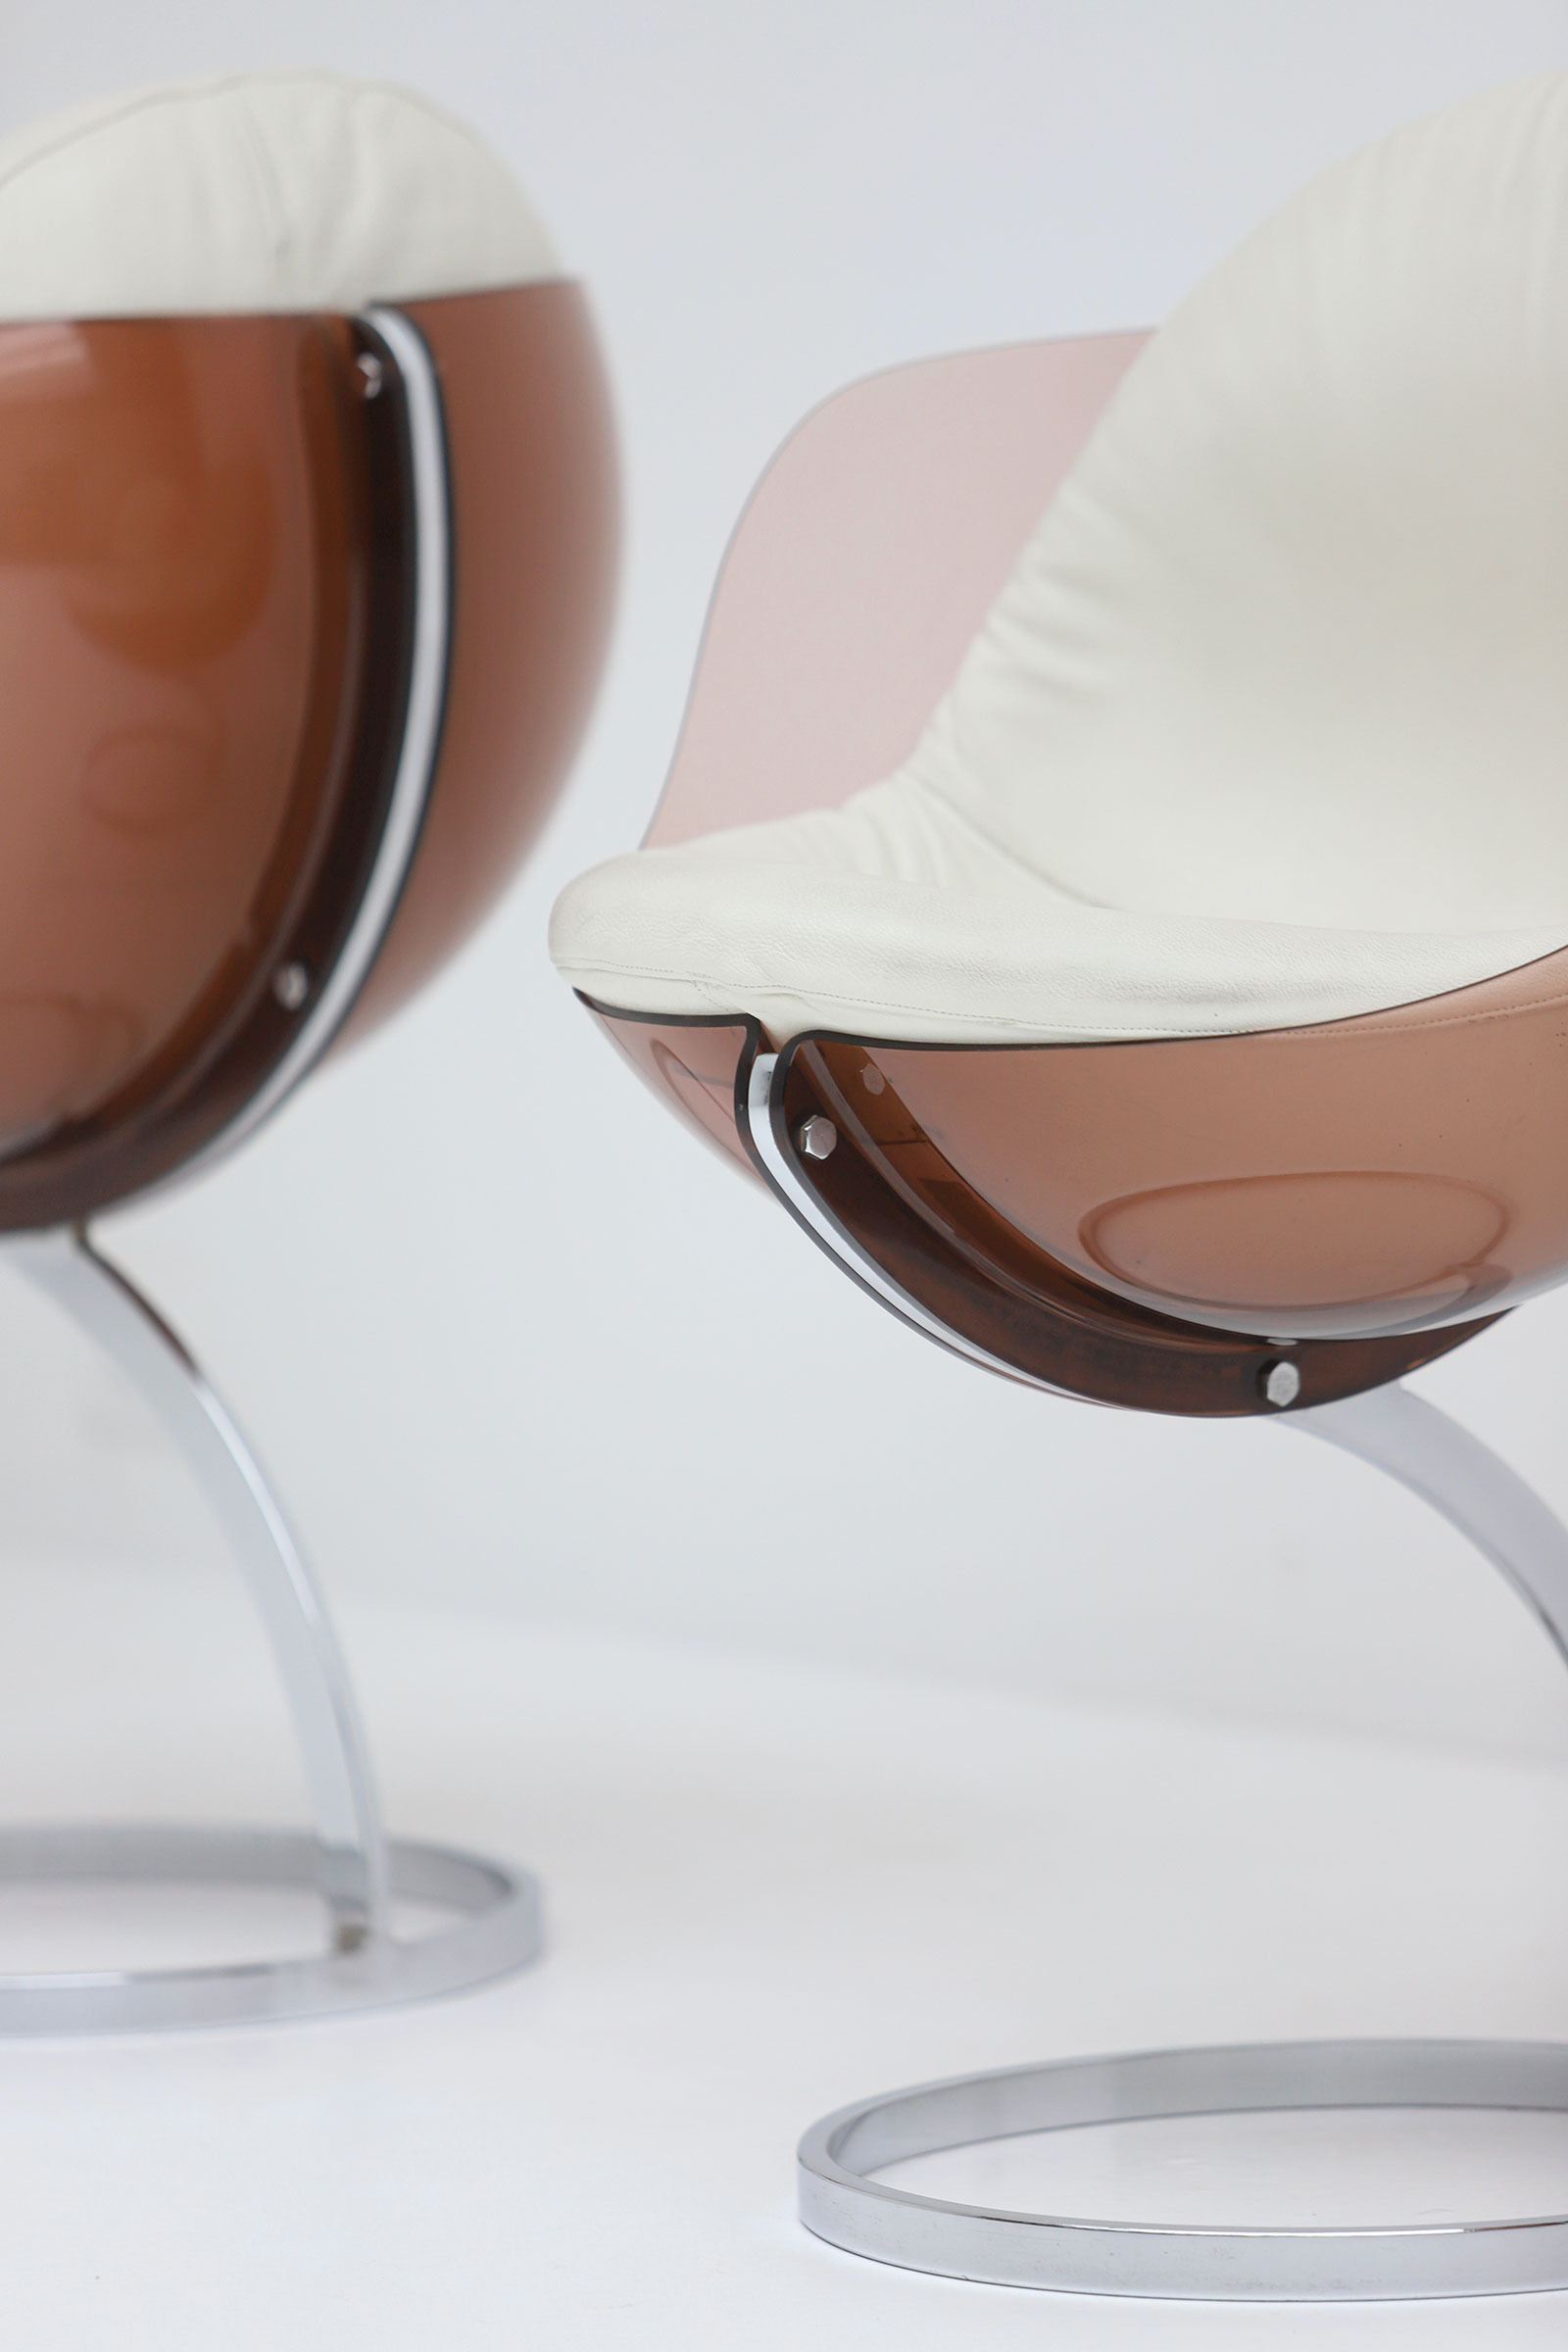 Sphere chair designed by Boris Tabacoffimage 5